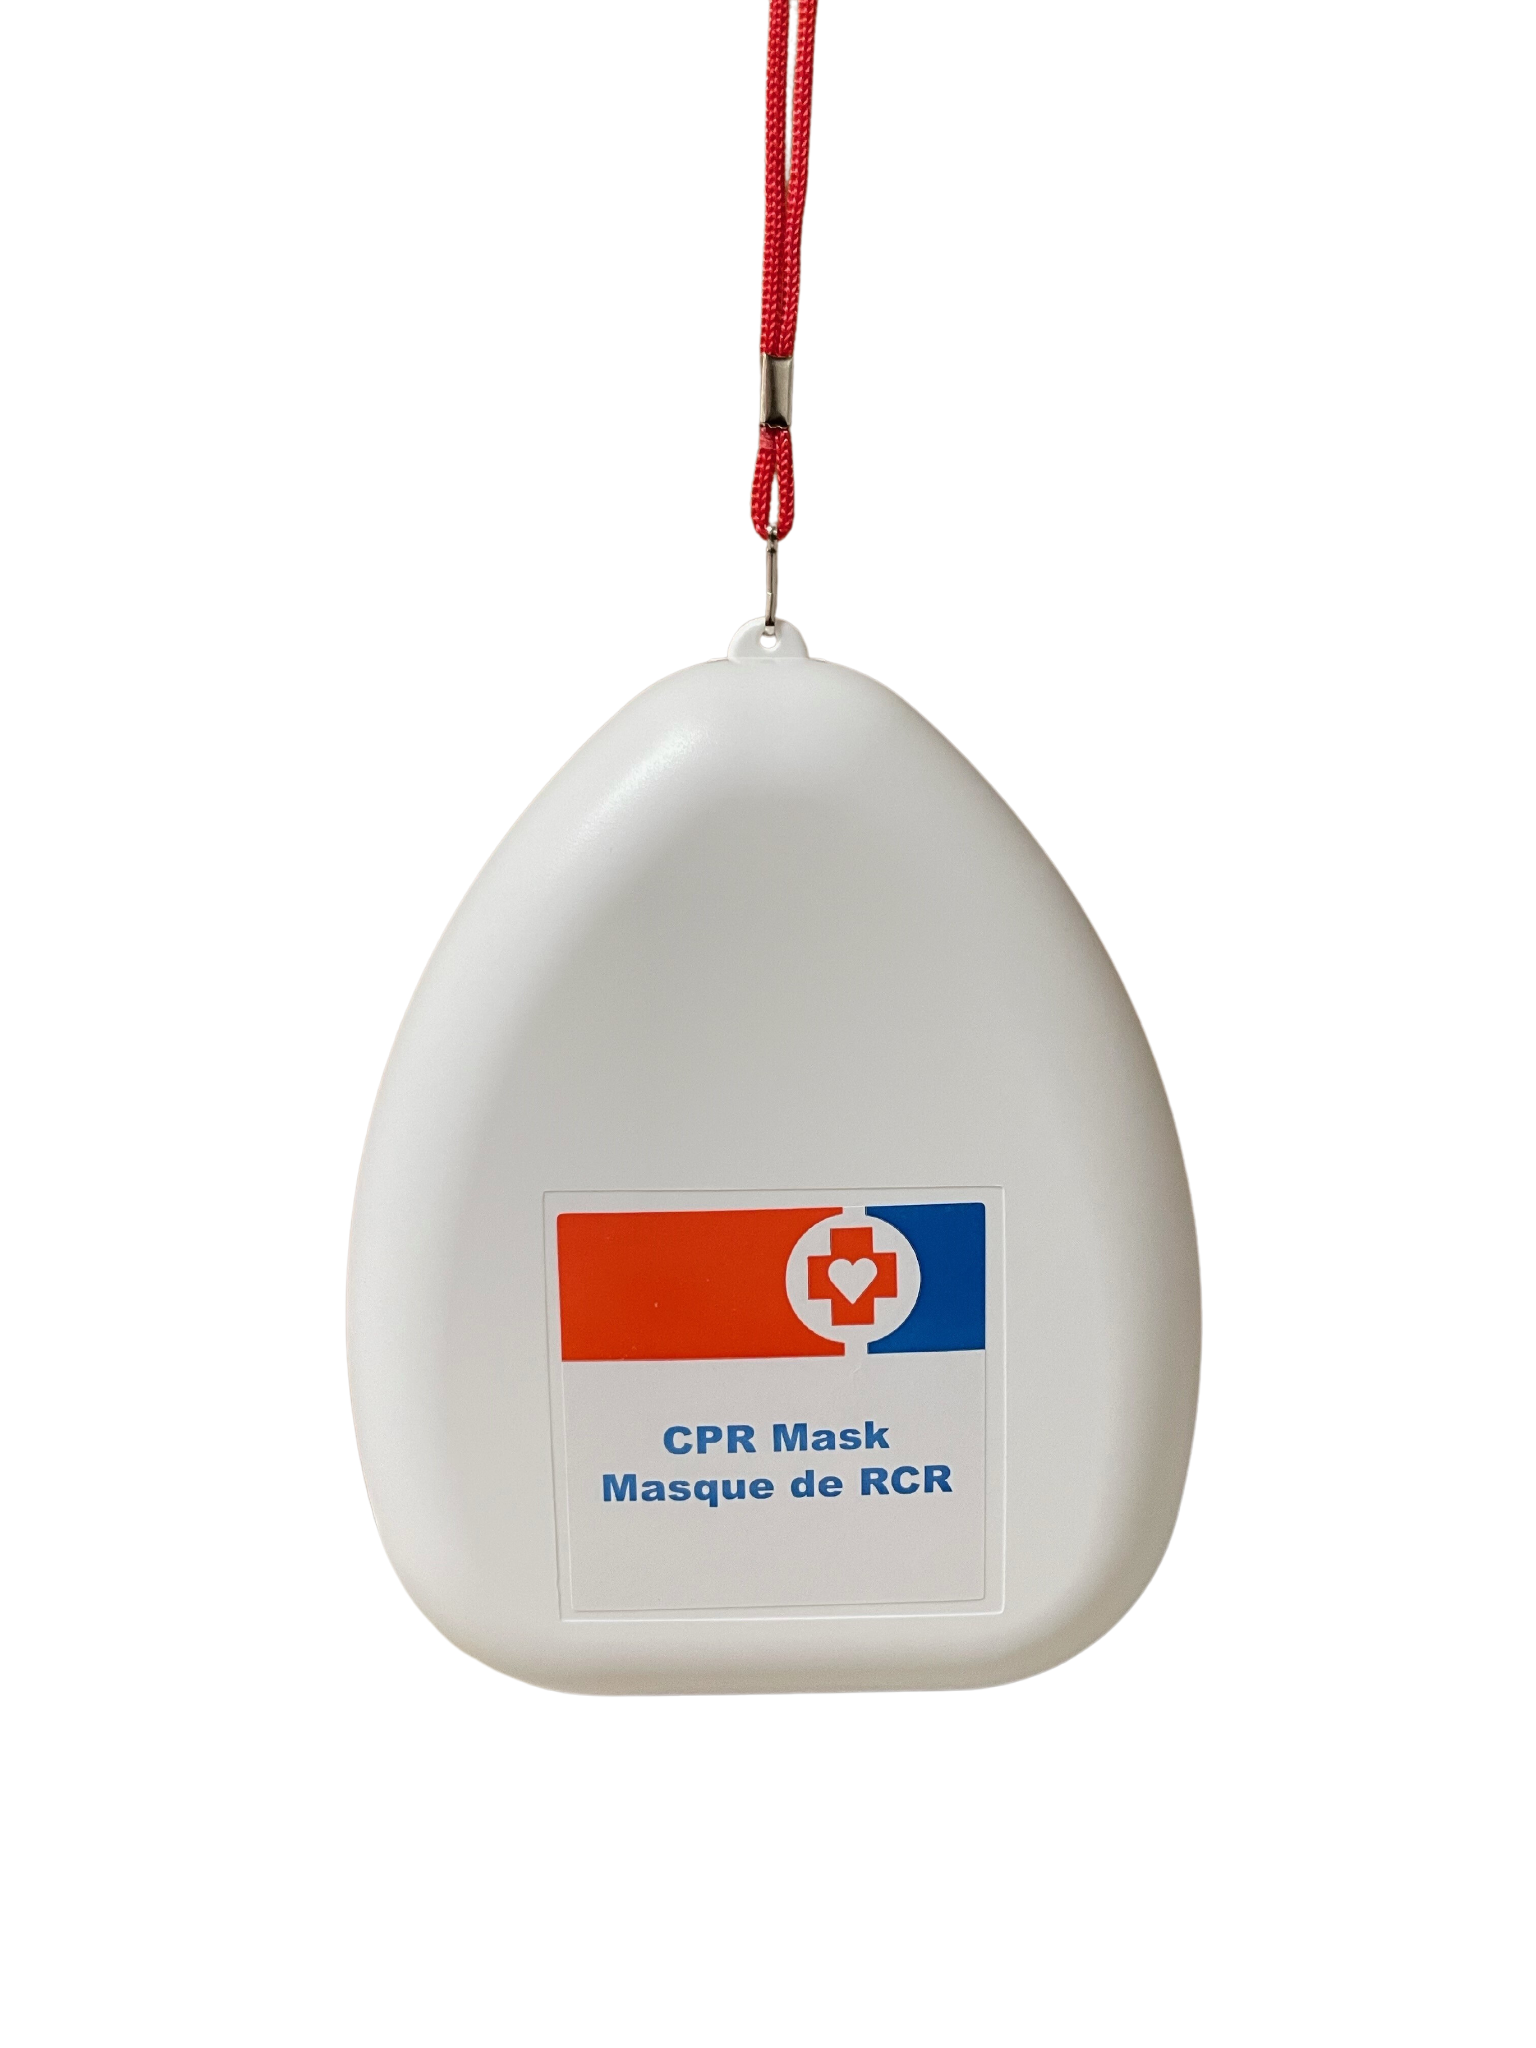 CPR Pocket Mask with O2 Inlet in Clamshell Case - Alert First Aid Inc